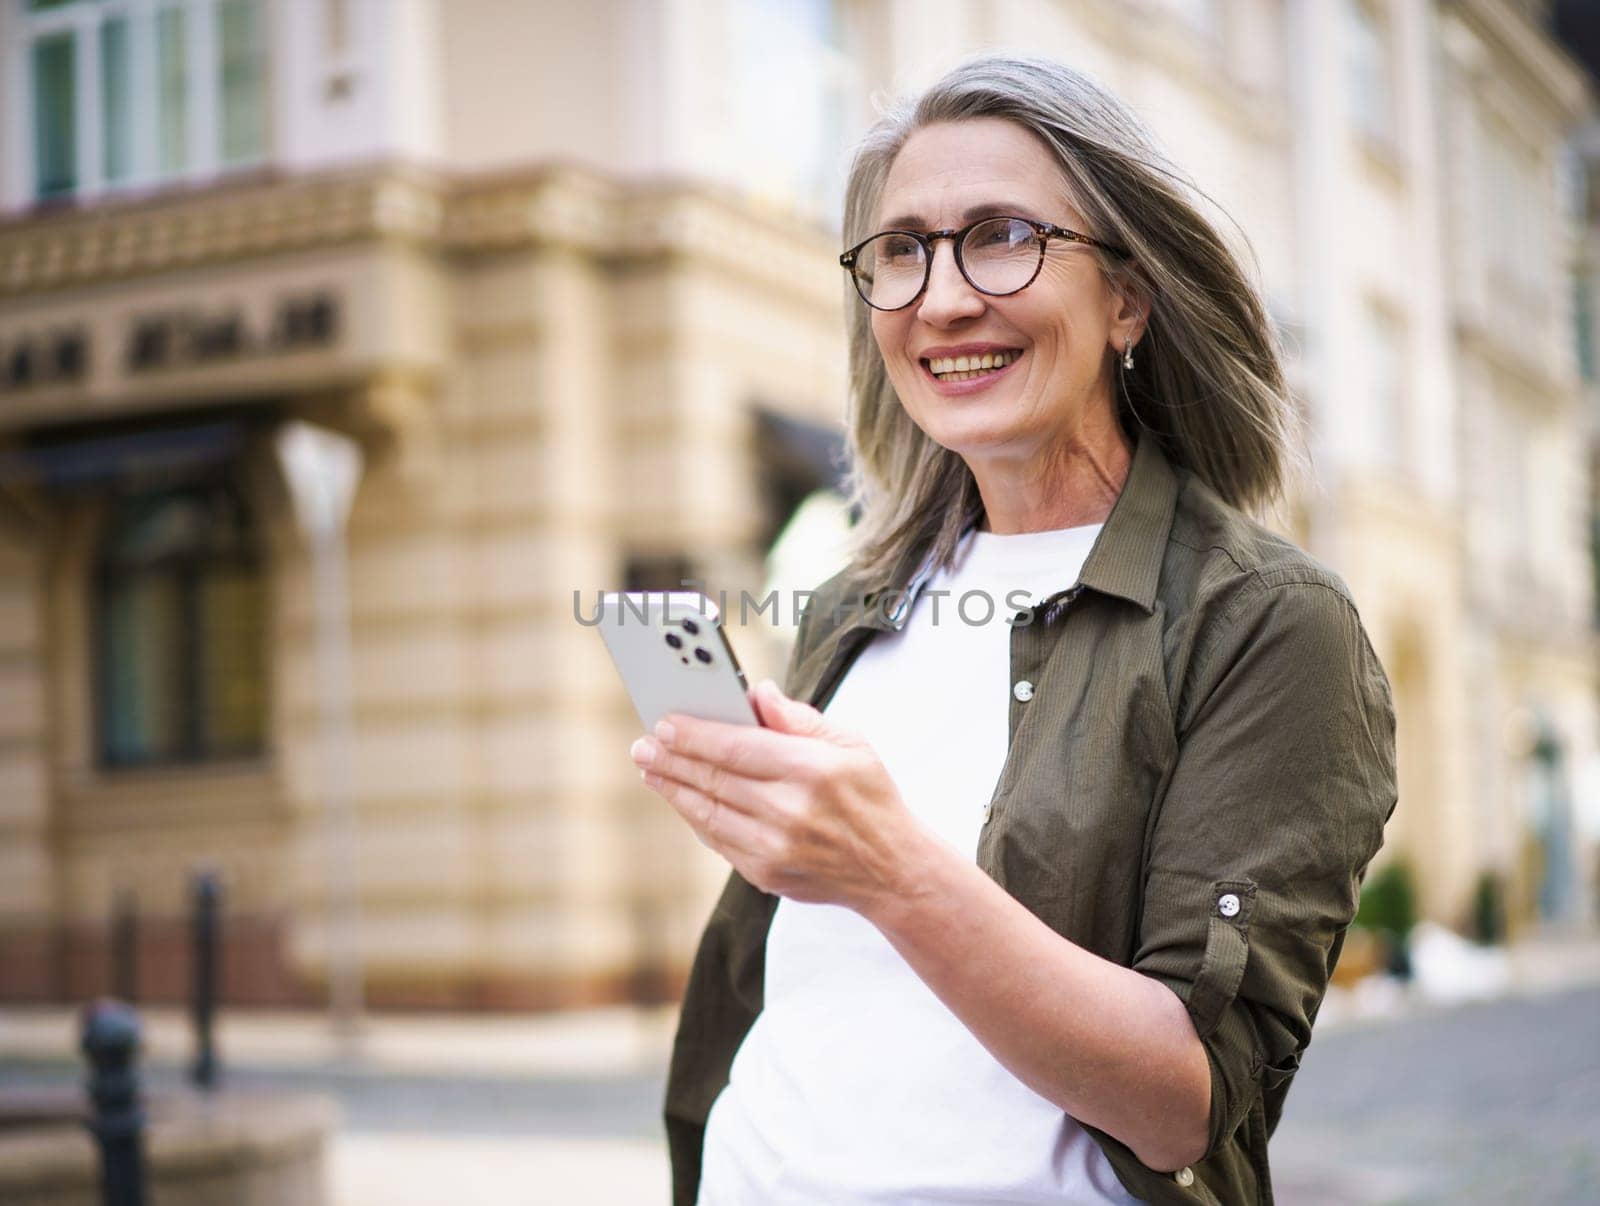 Joyful senior woman with grey hair and mobile phone in hand, enjoying her time in beautiful European city. Image showcases active and modern urban lifestyle of the elderly generation. by LipikStockMedia